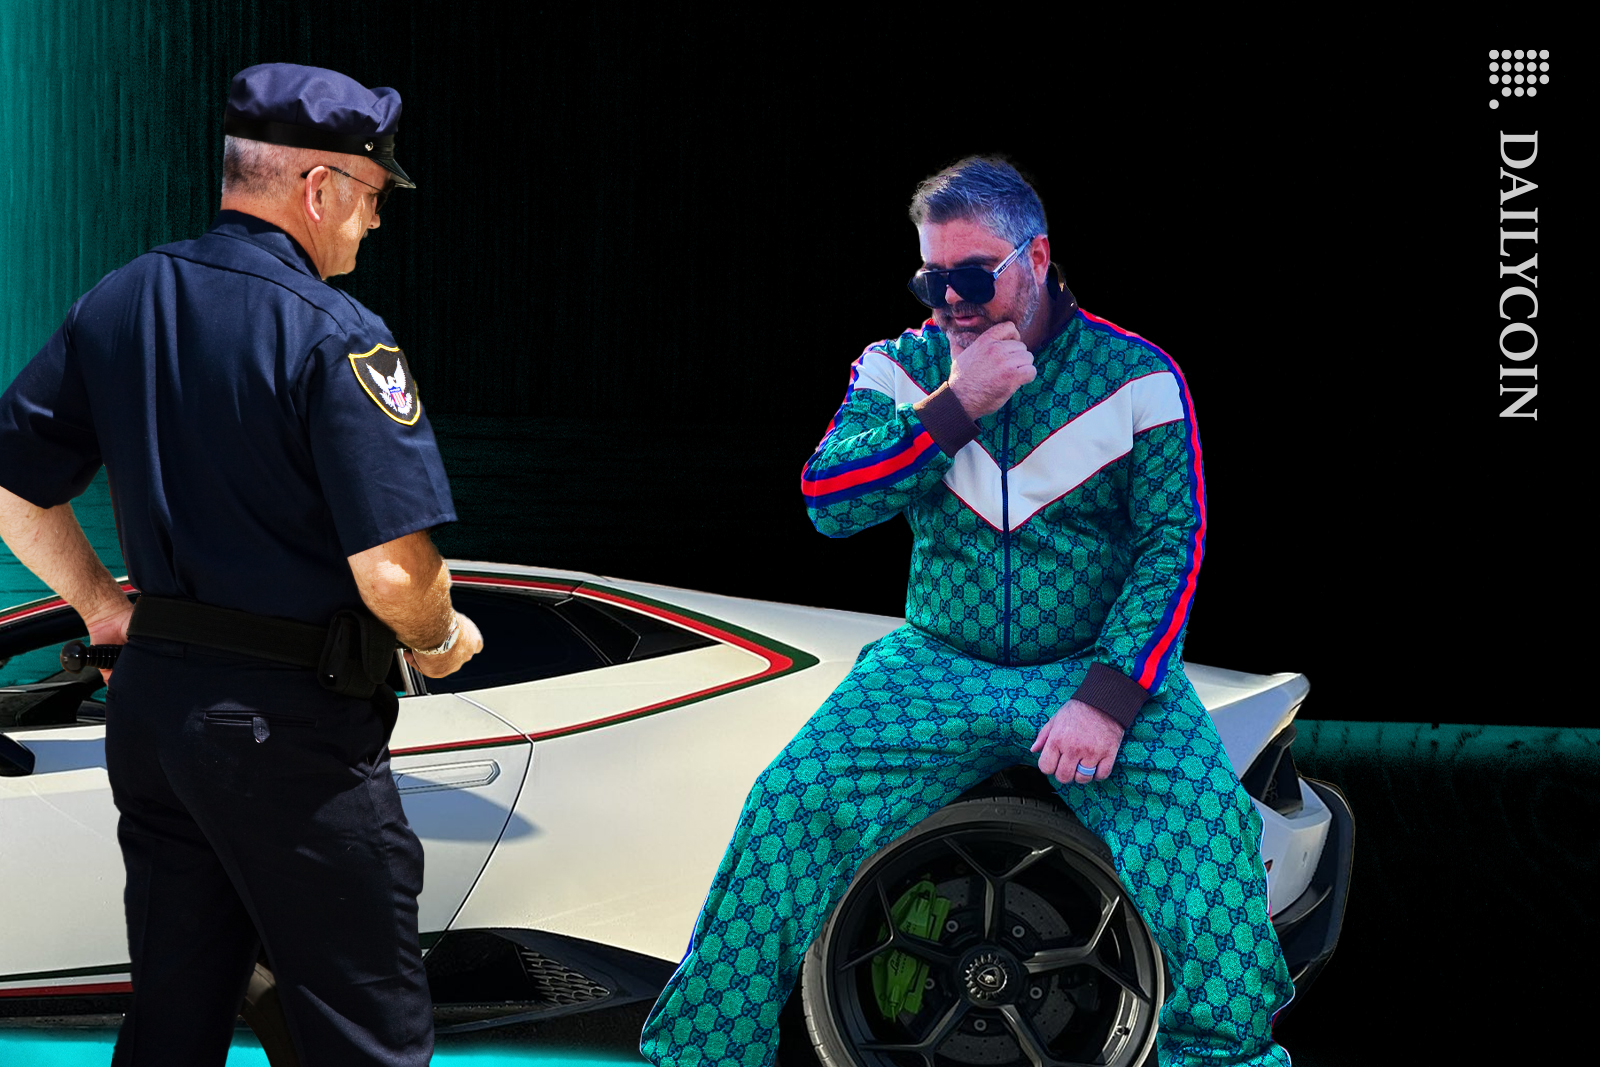 BitBoy sitting on his Lambo, and looks at a police man.